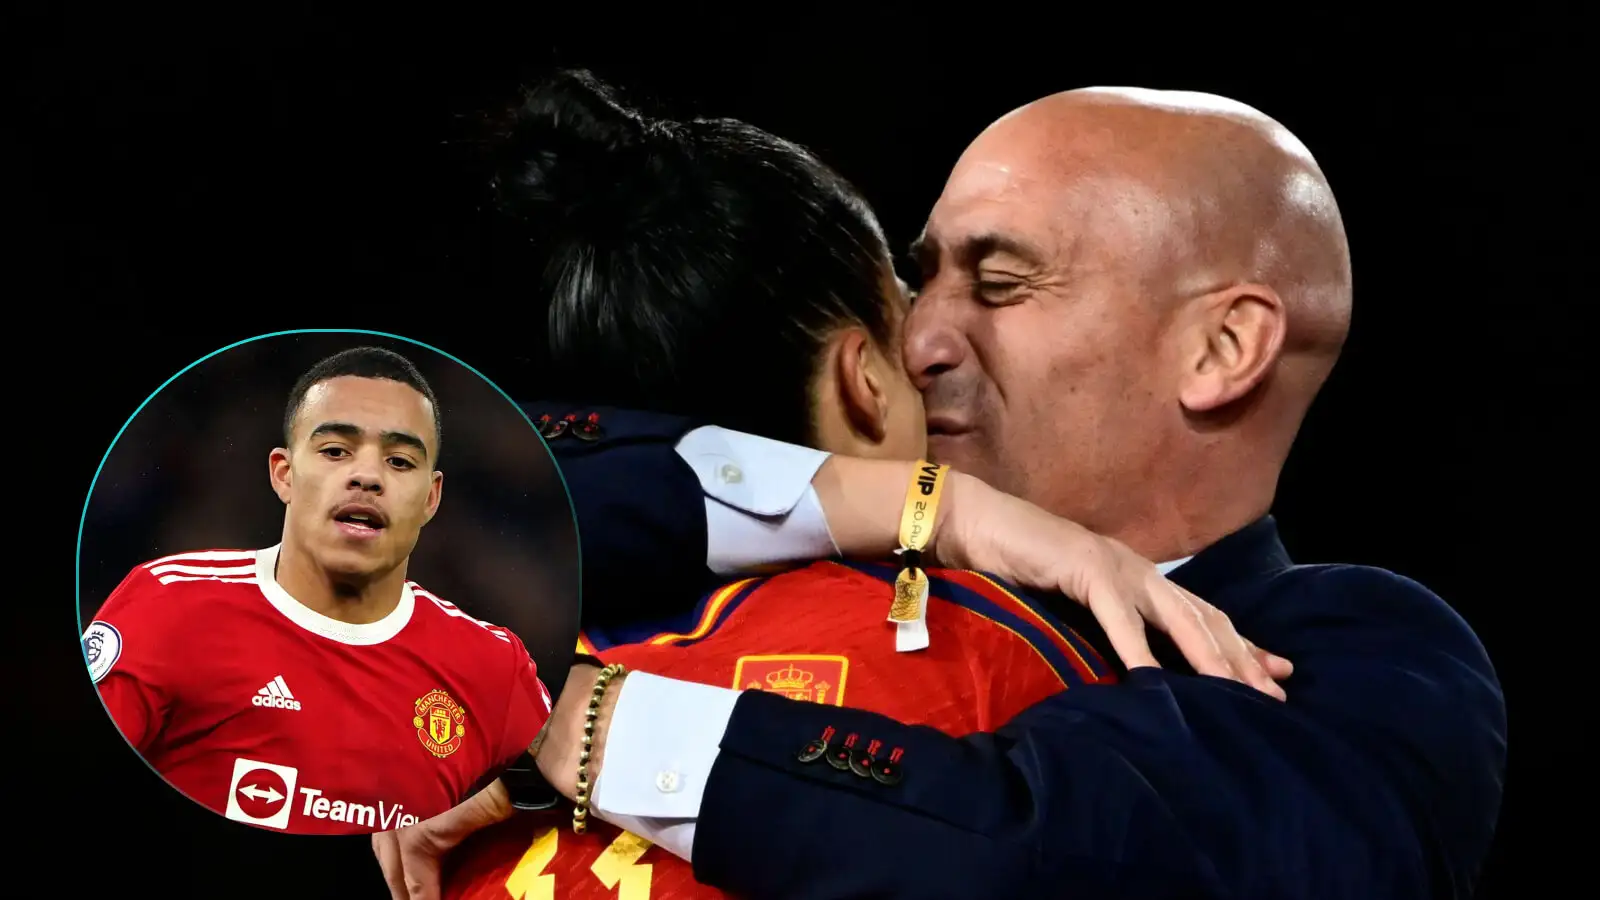 Jenni Hermoso is kissed by Rubiales while Mason Greenwood is in a circle.